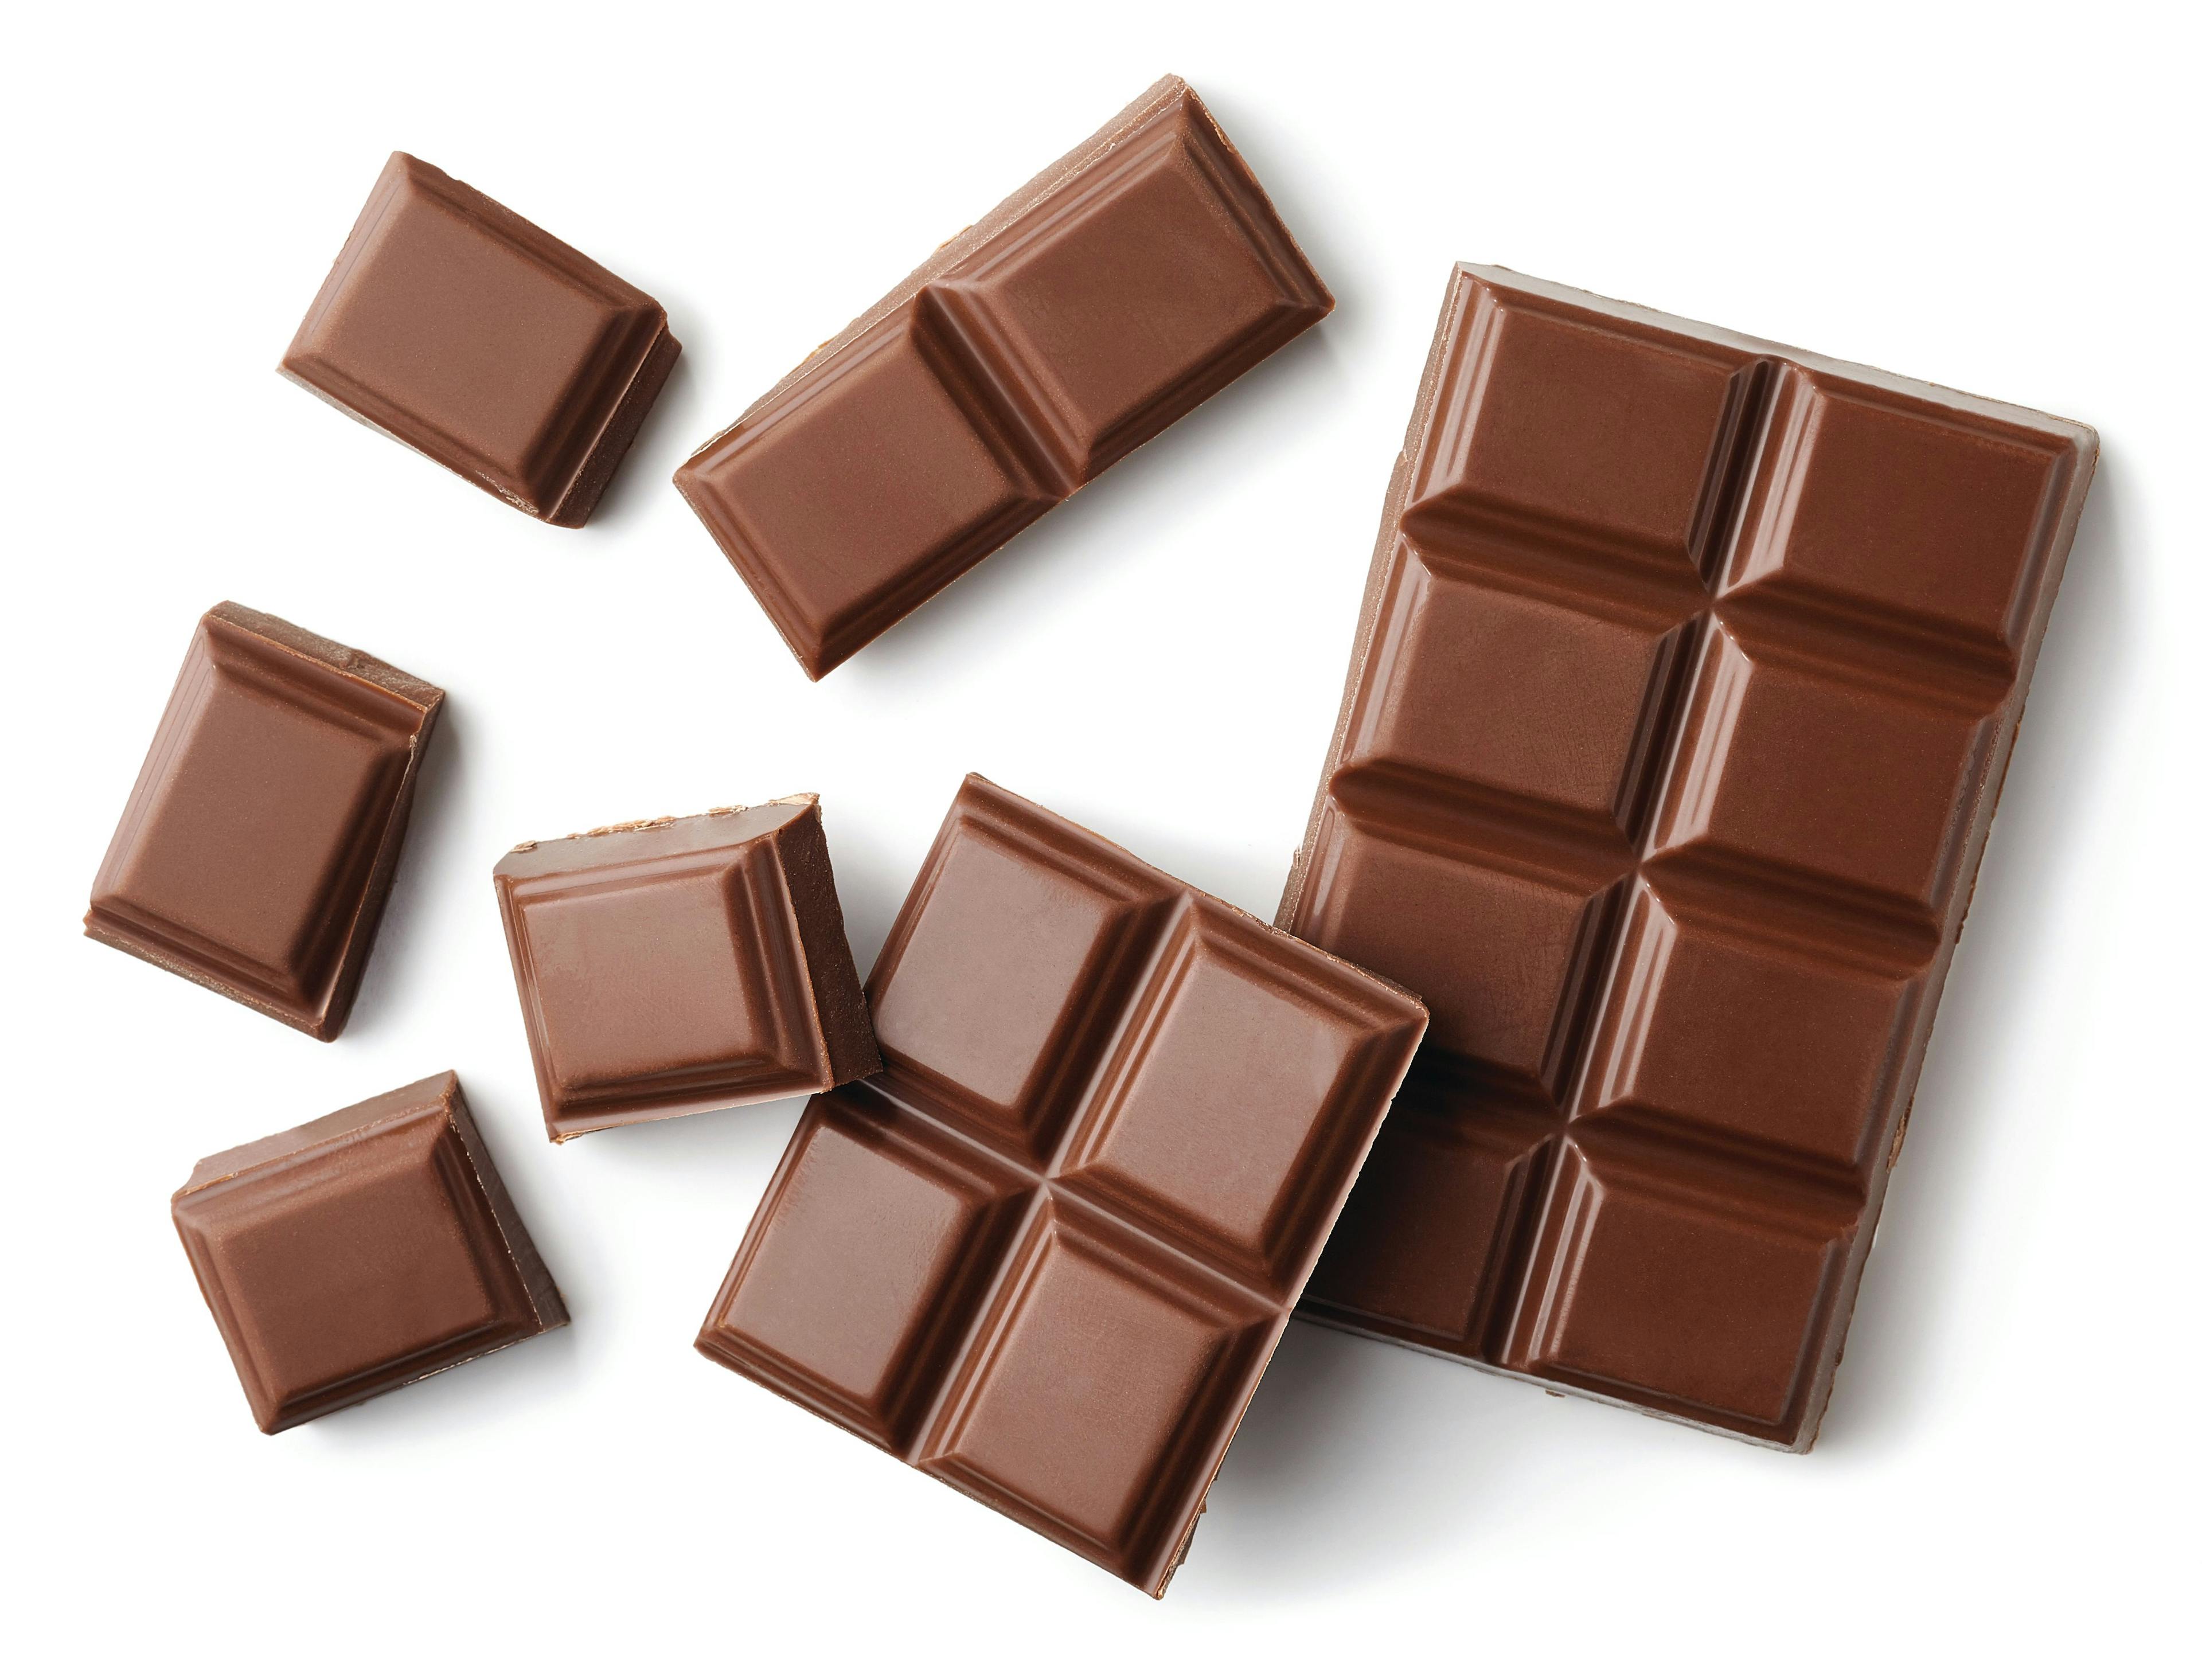 This Valentine’s Day, Remember Chocolate May Protect the Heart Against Heart Disease